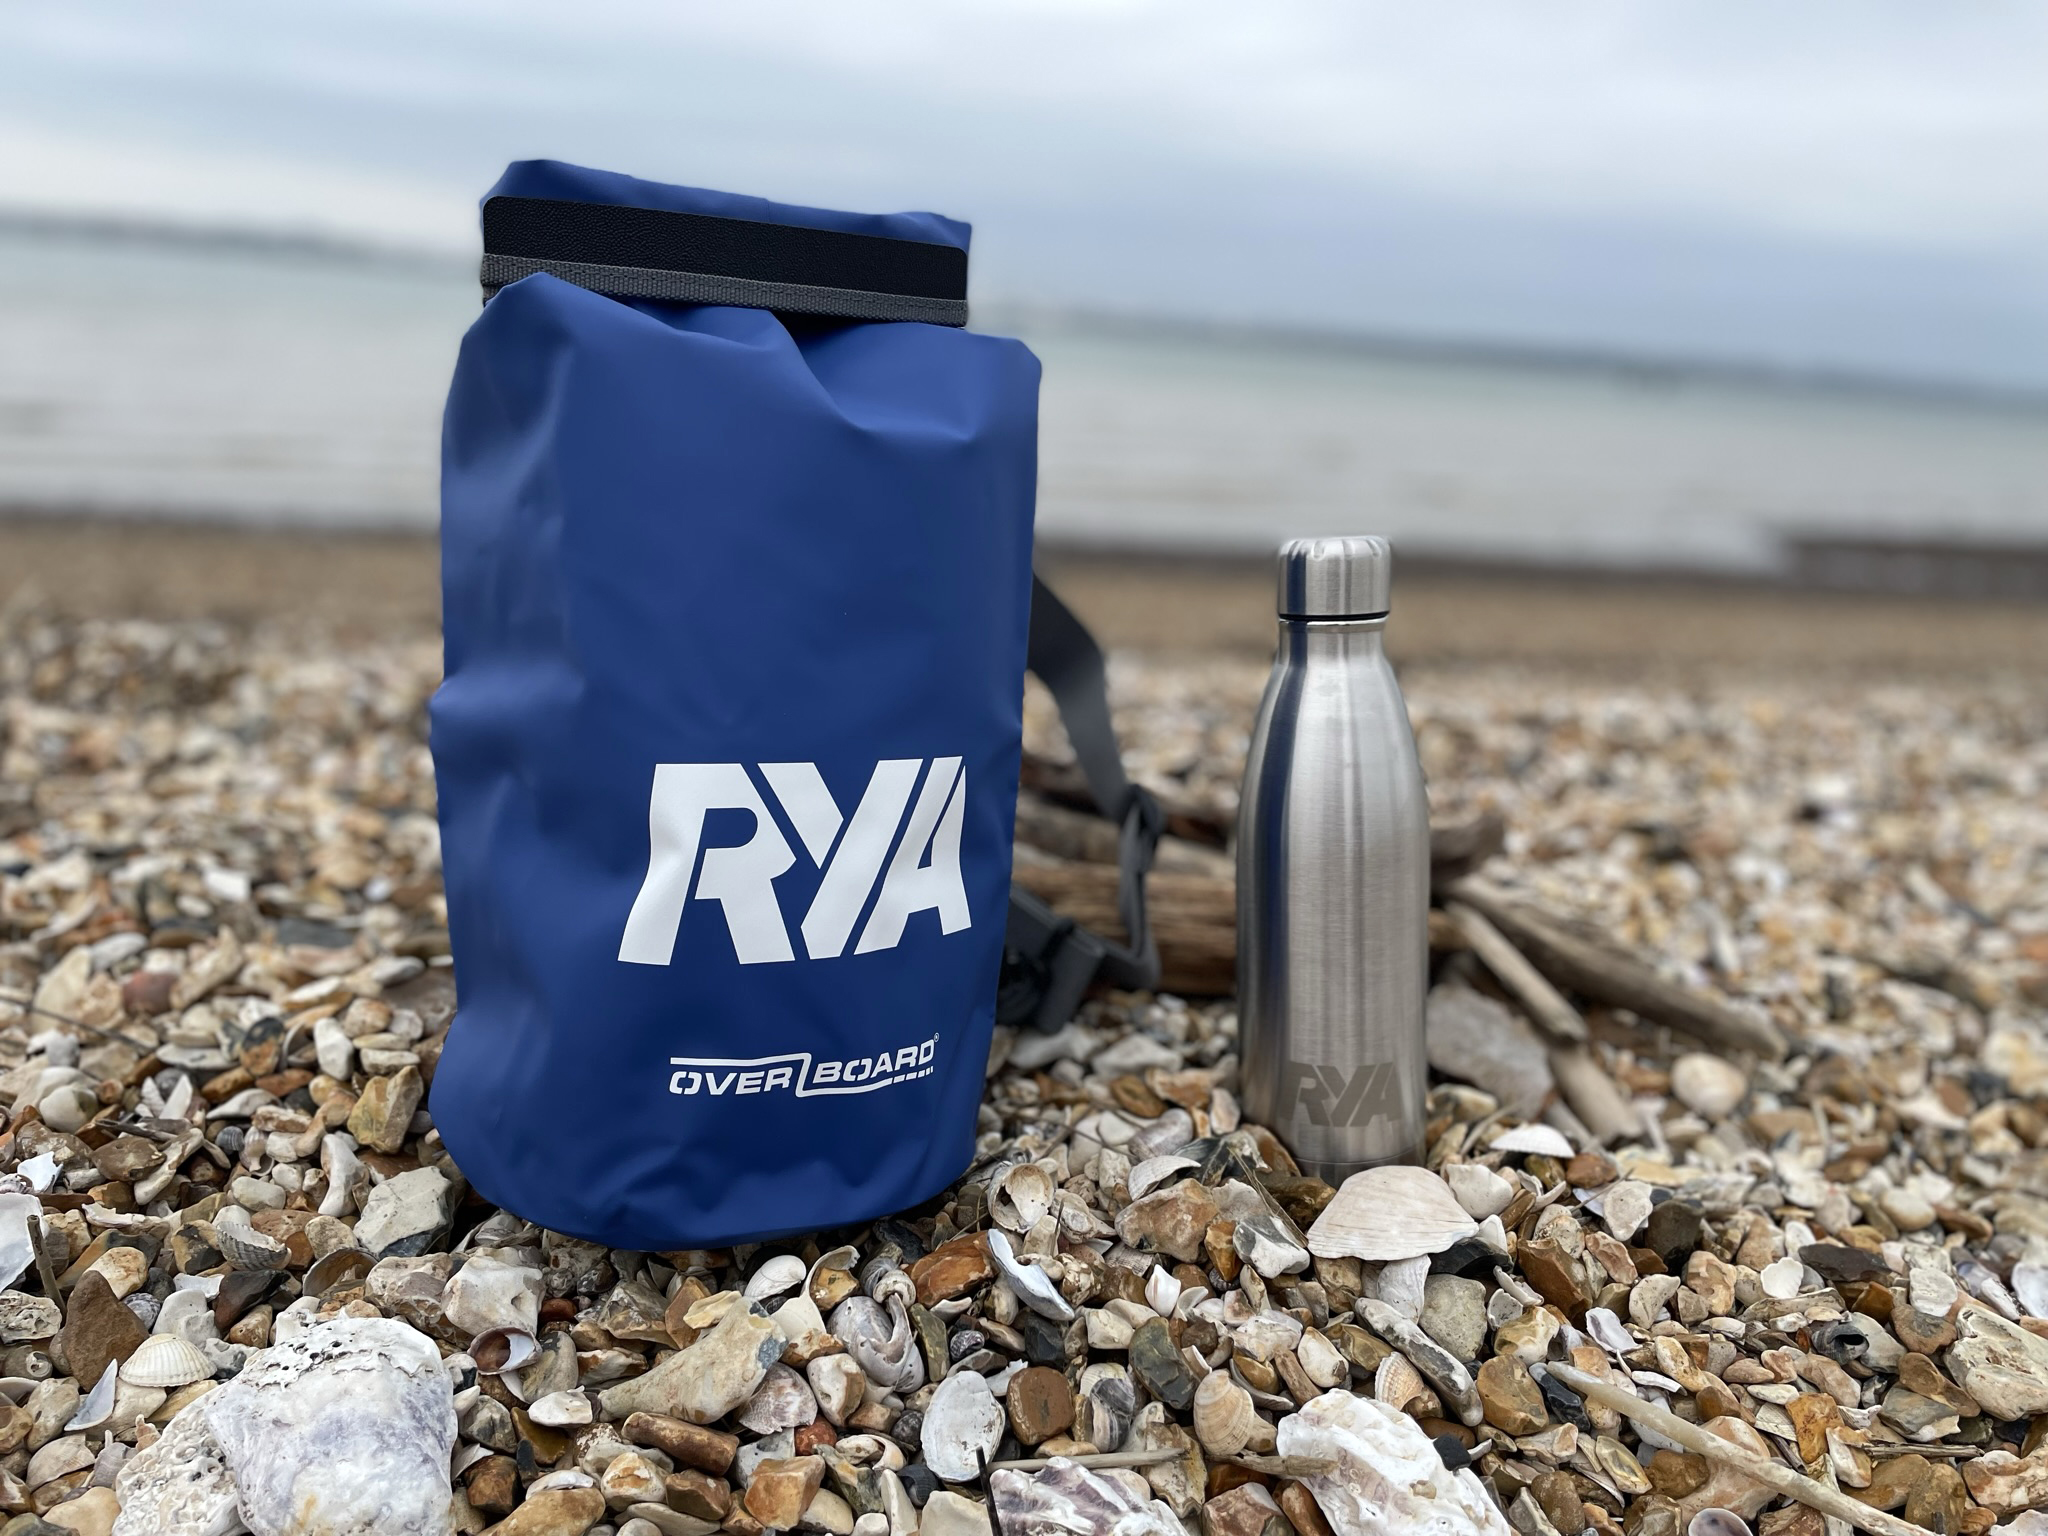 RYA overboard dry bag and RYA water bottle sat on the beach